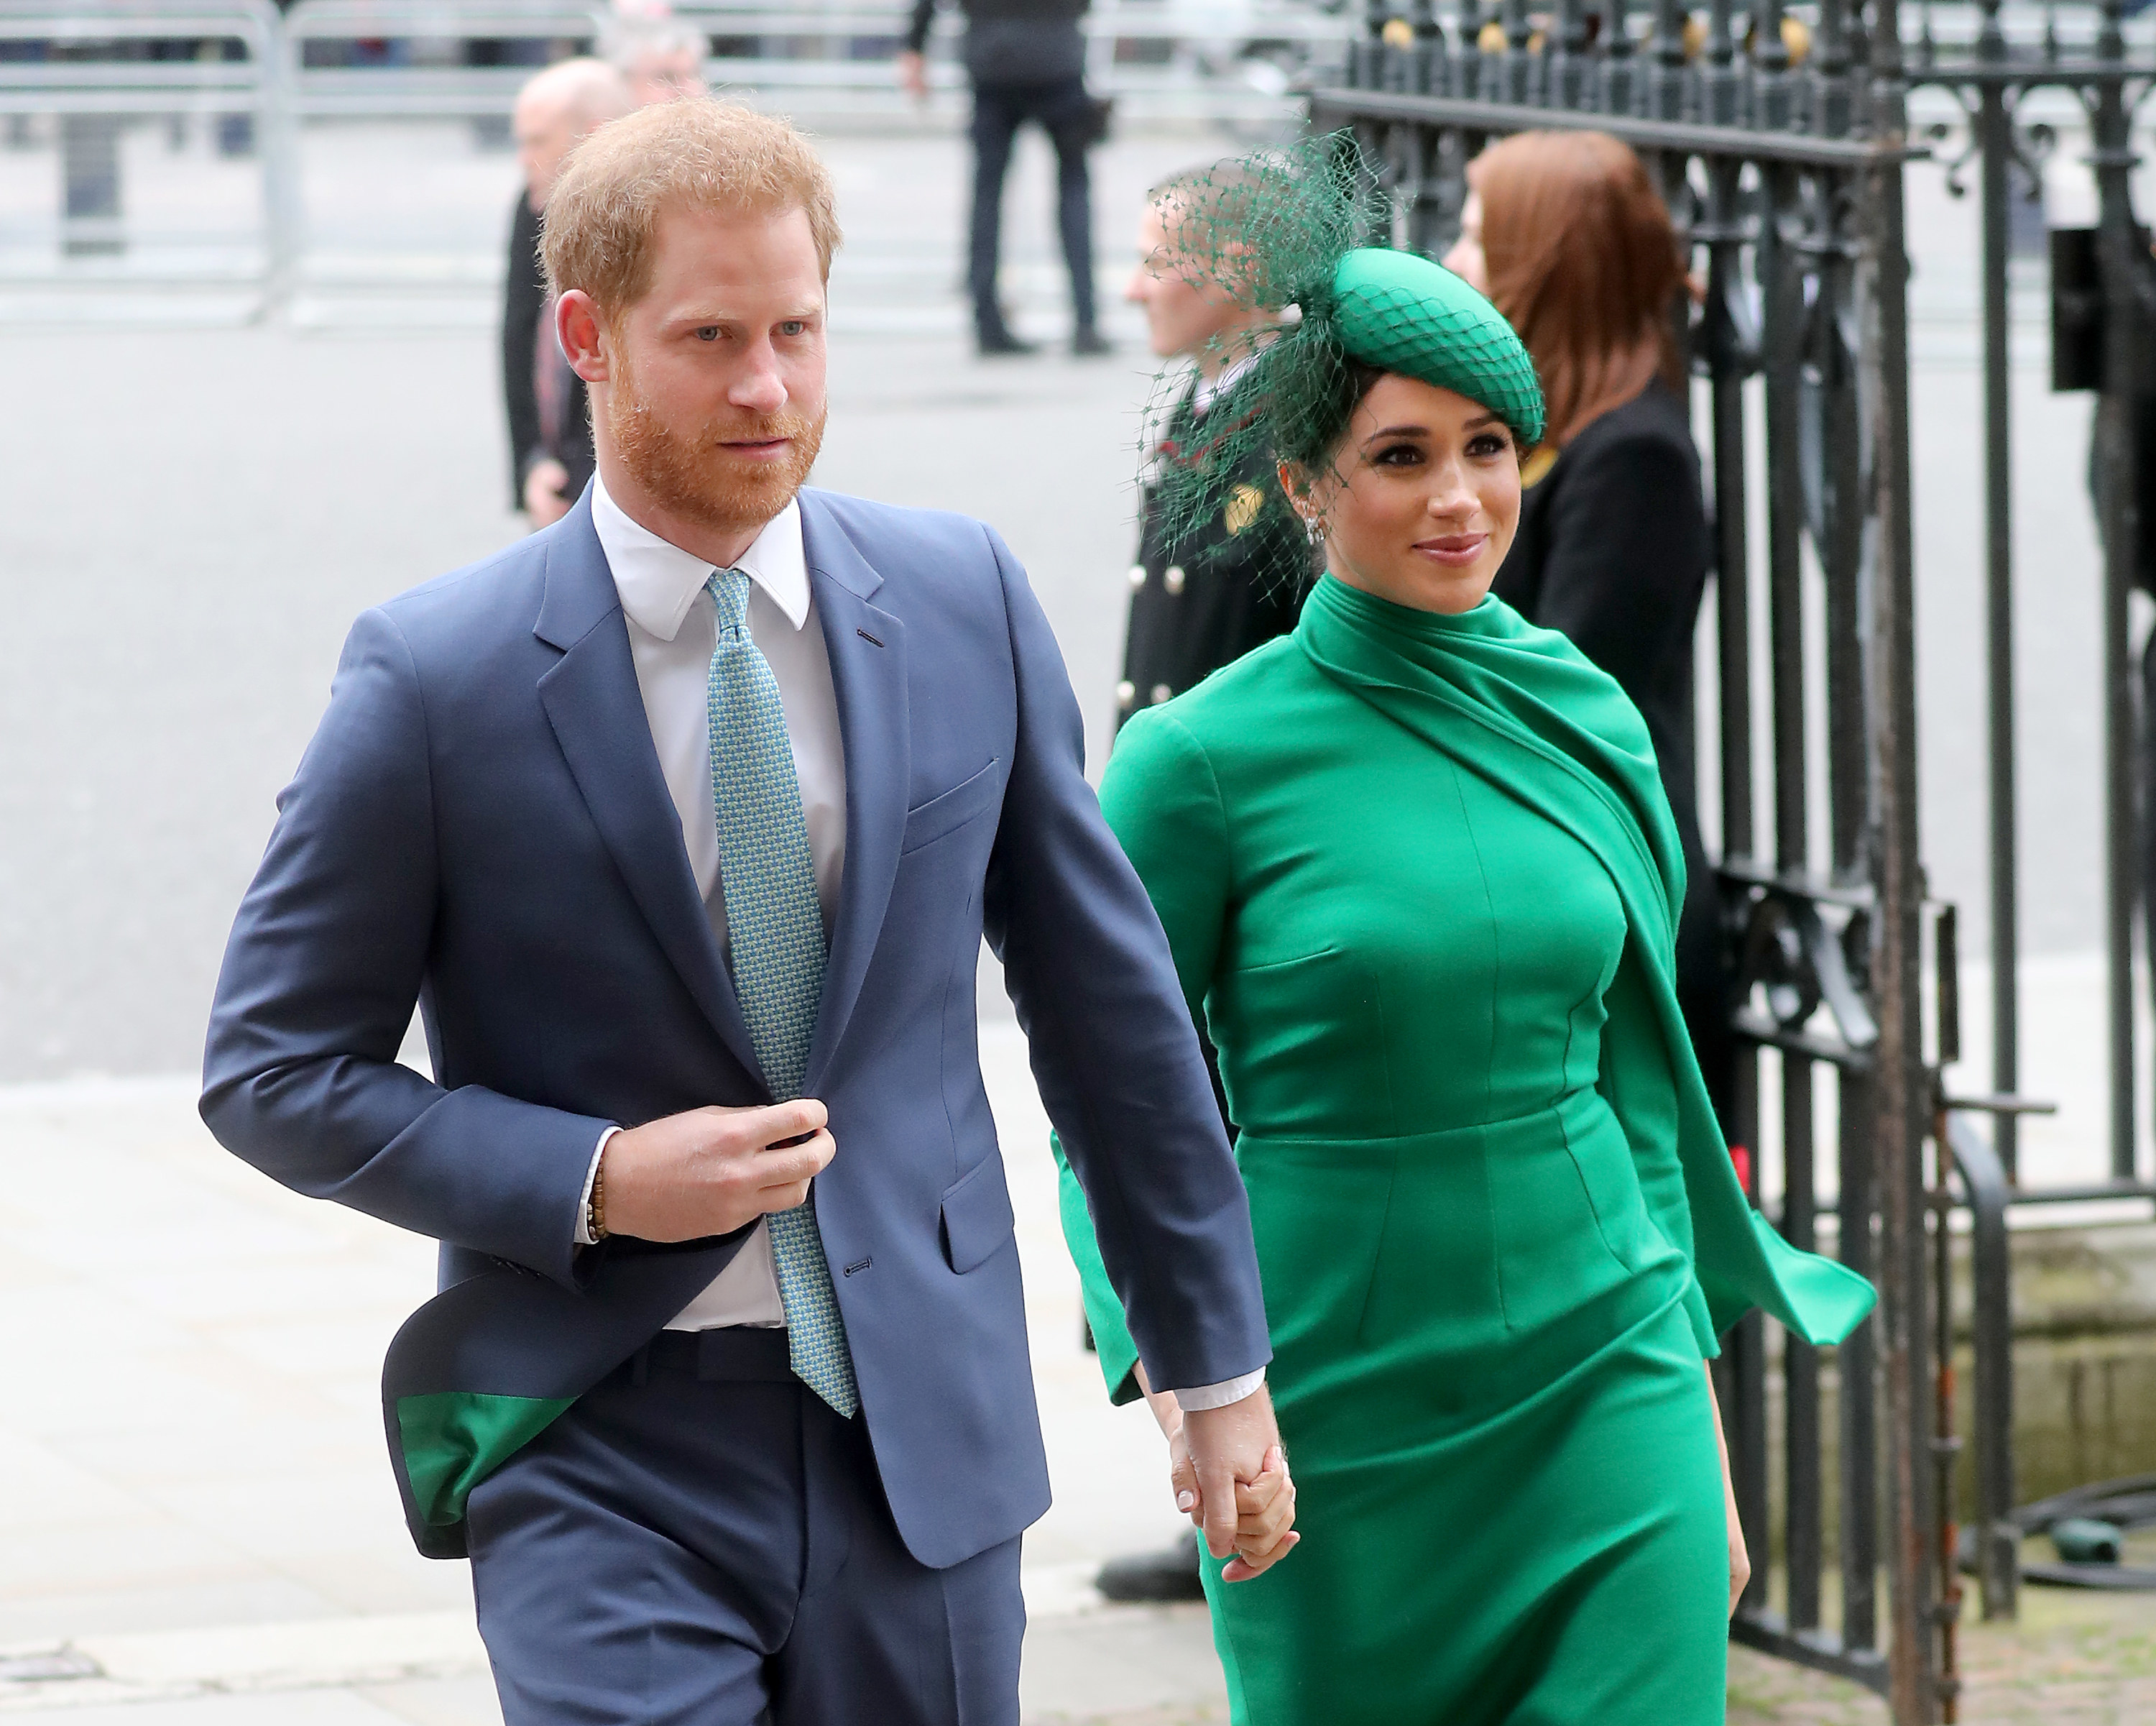 Prince Harry and Meghan, Duchess of Sussex at the Commonwealth Day Service 2020 on March 09, 2020 in London, England